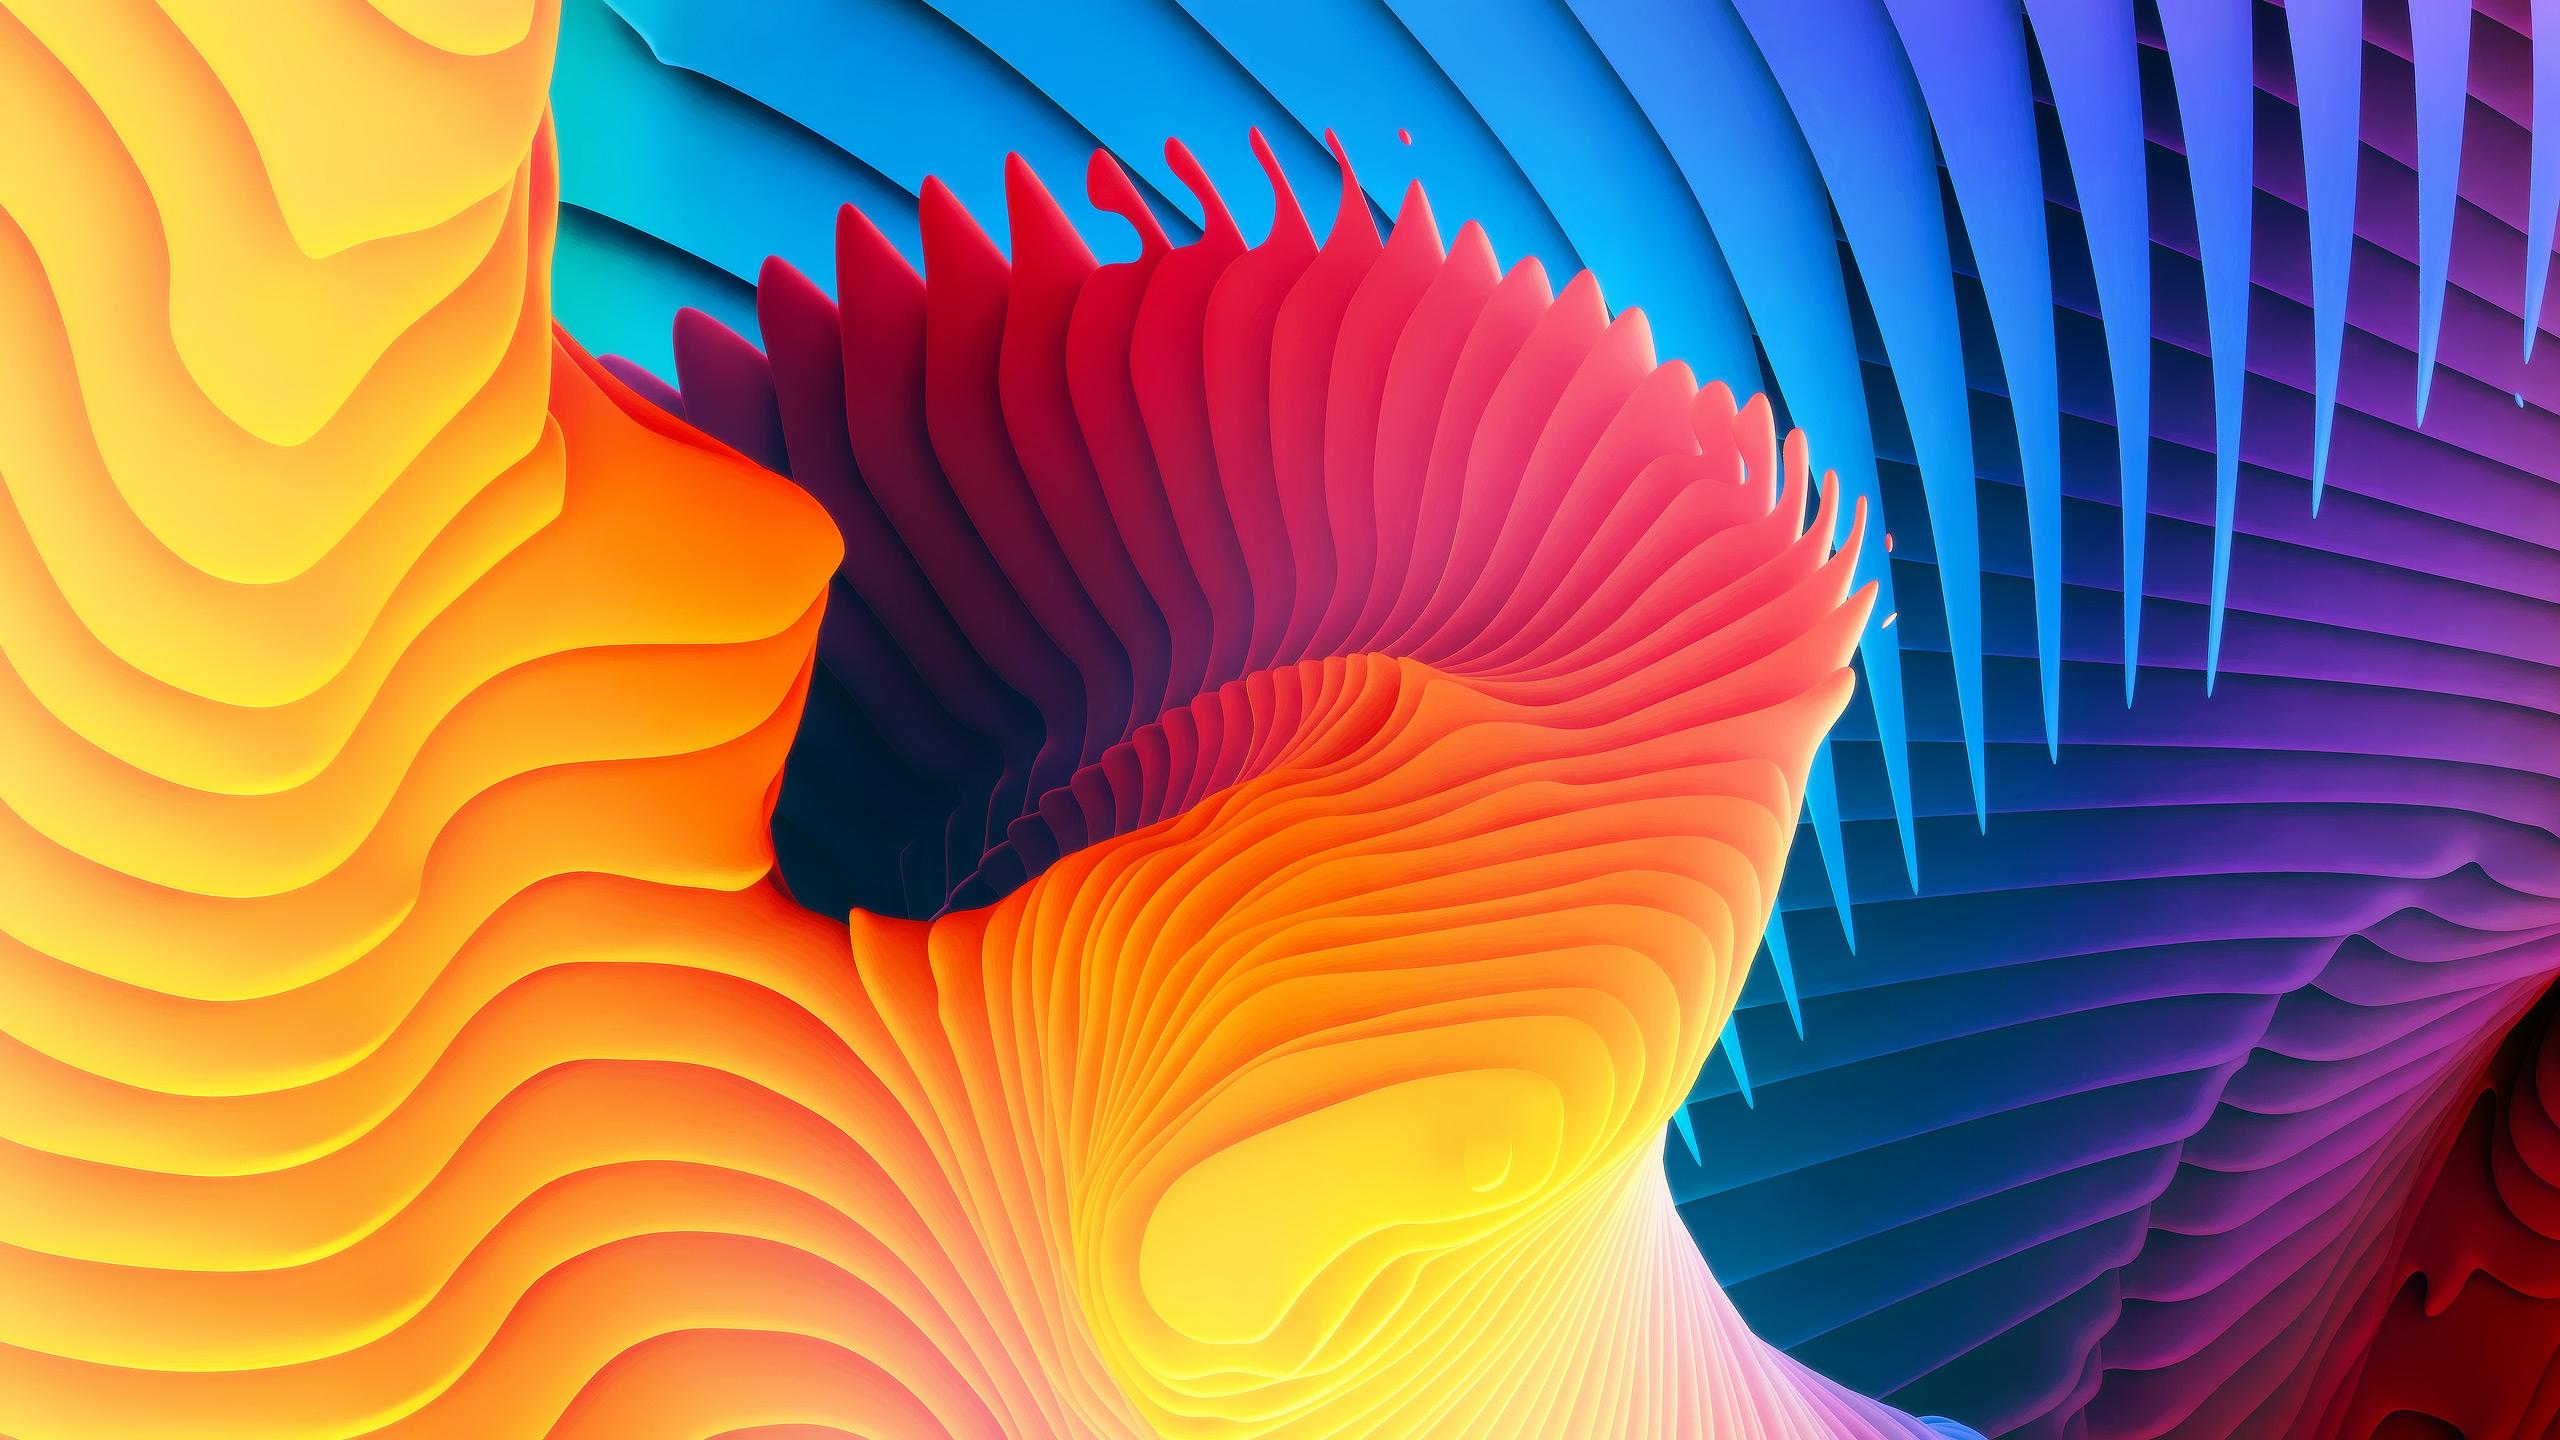 Windows 10 Wallpaper Free Download with Colorful Abstract Spirals - HD